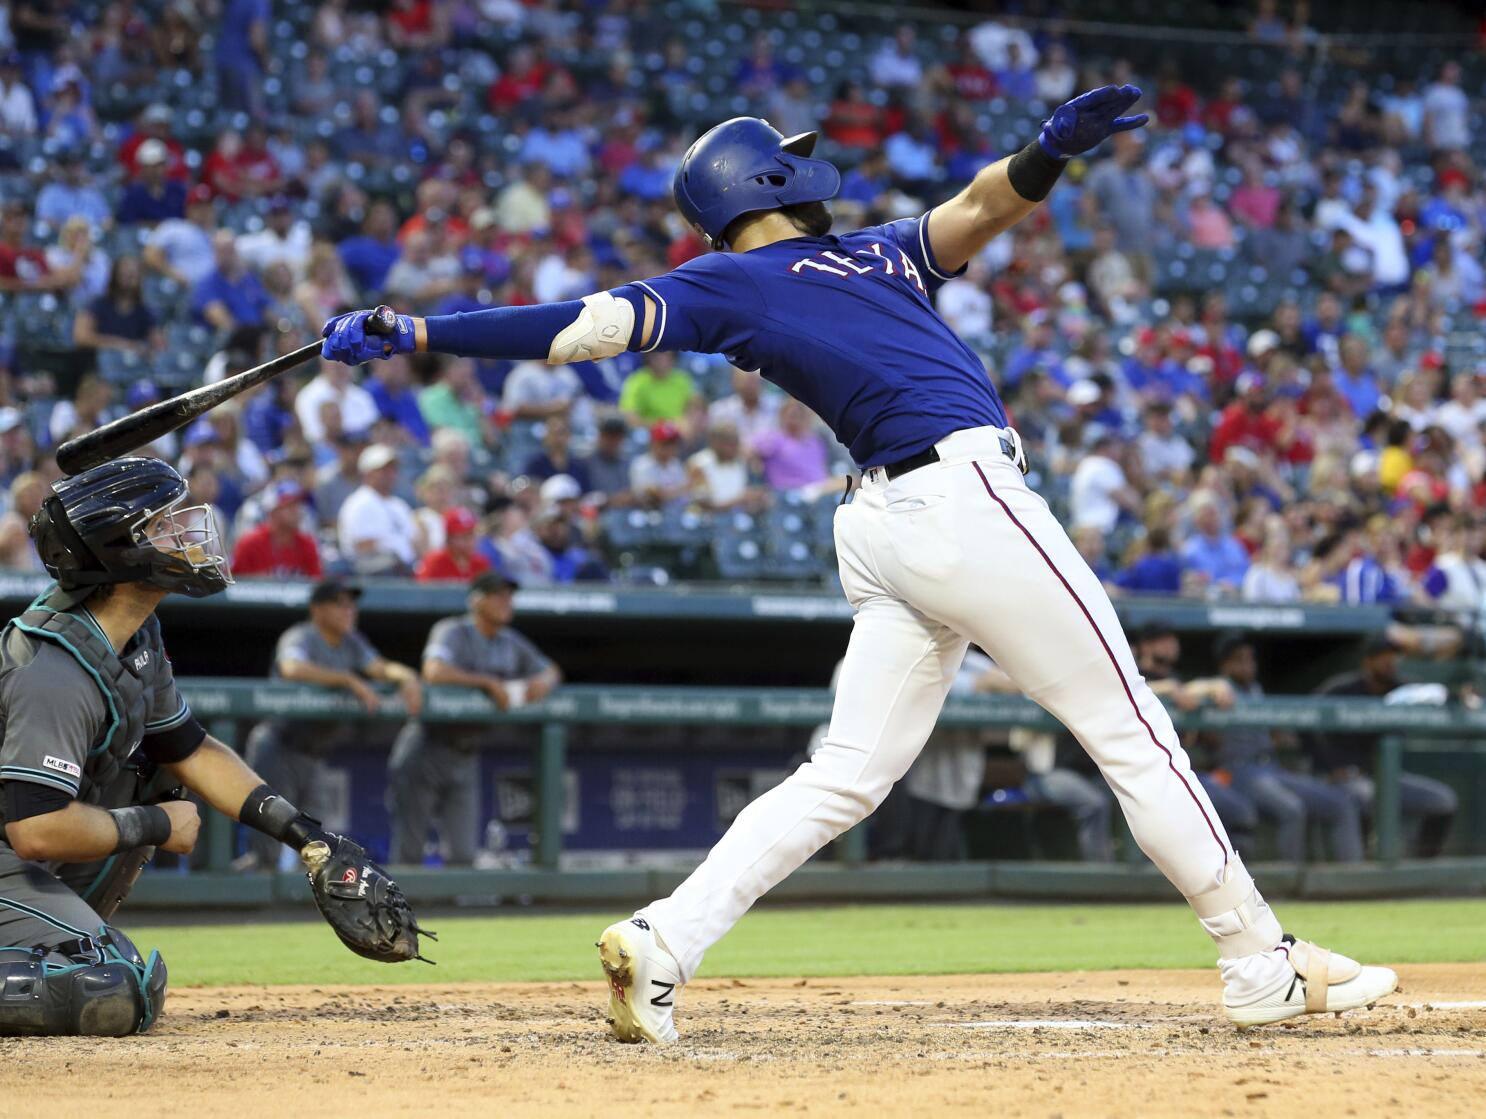 Joey Gallo tests positive for COVID-19 - NBC Sports